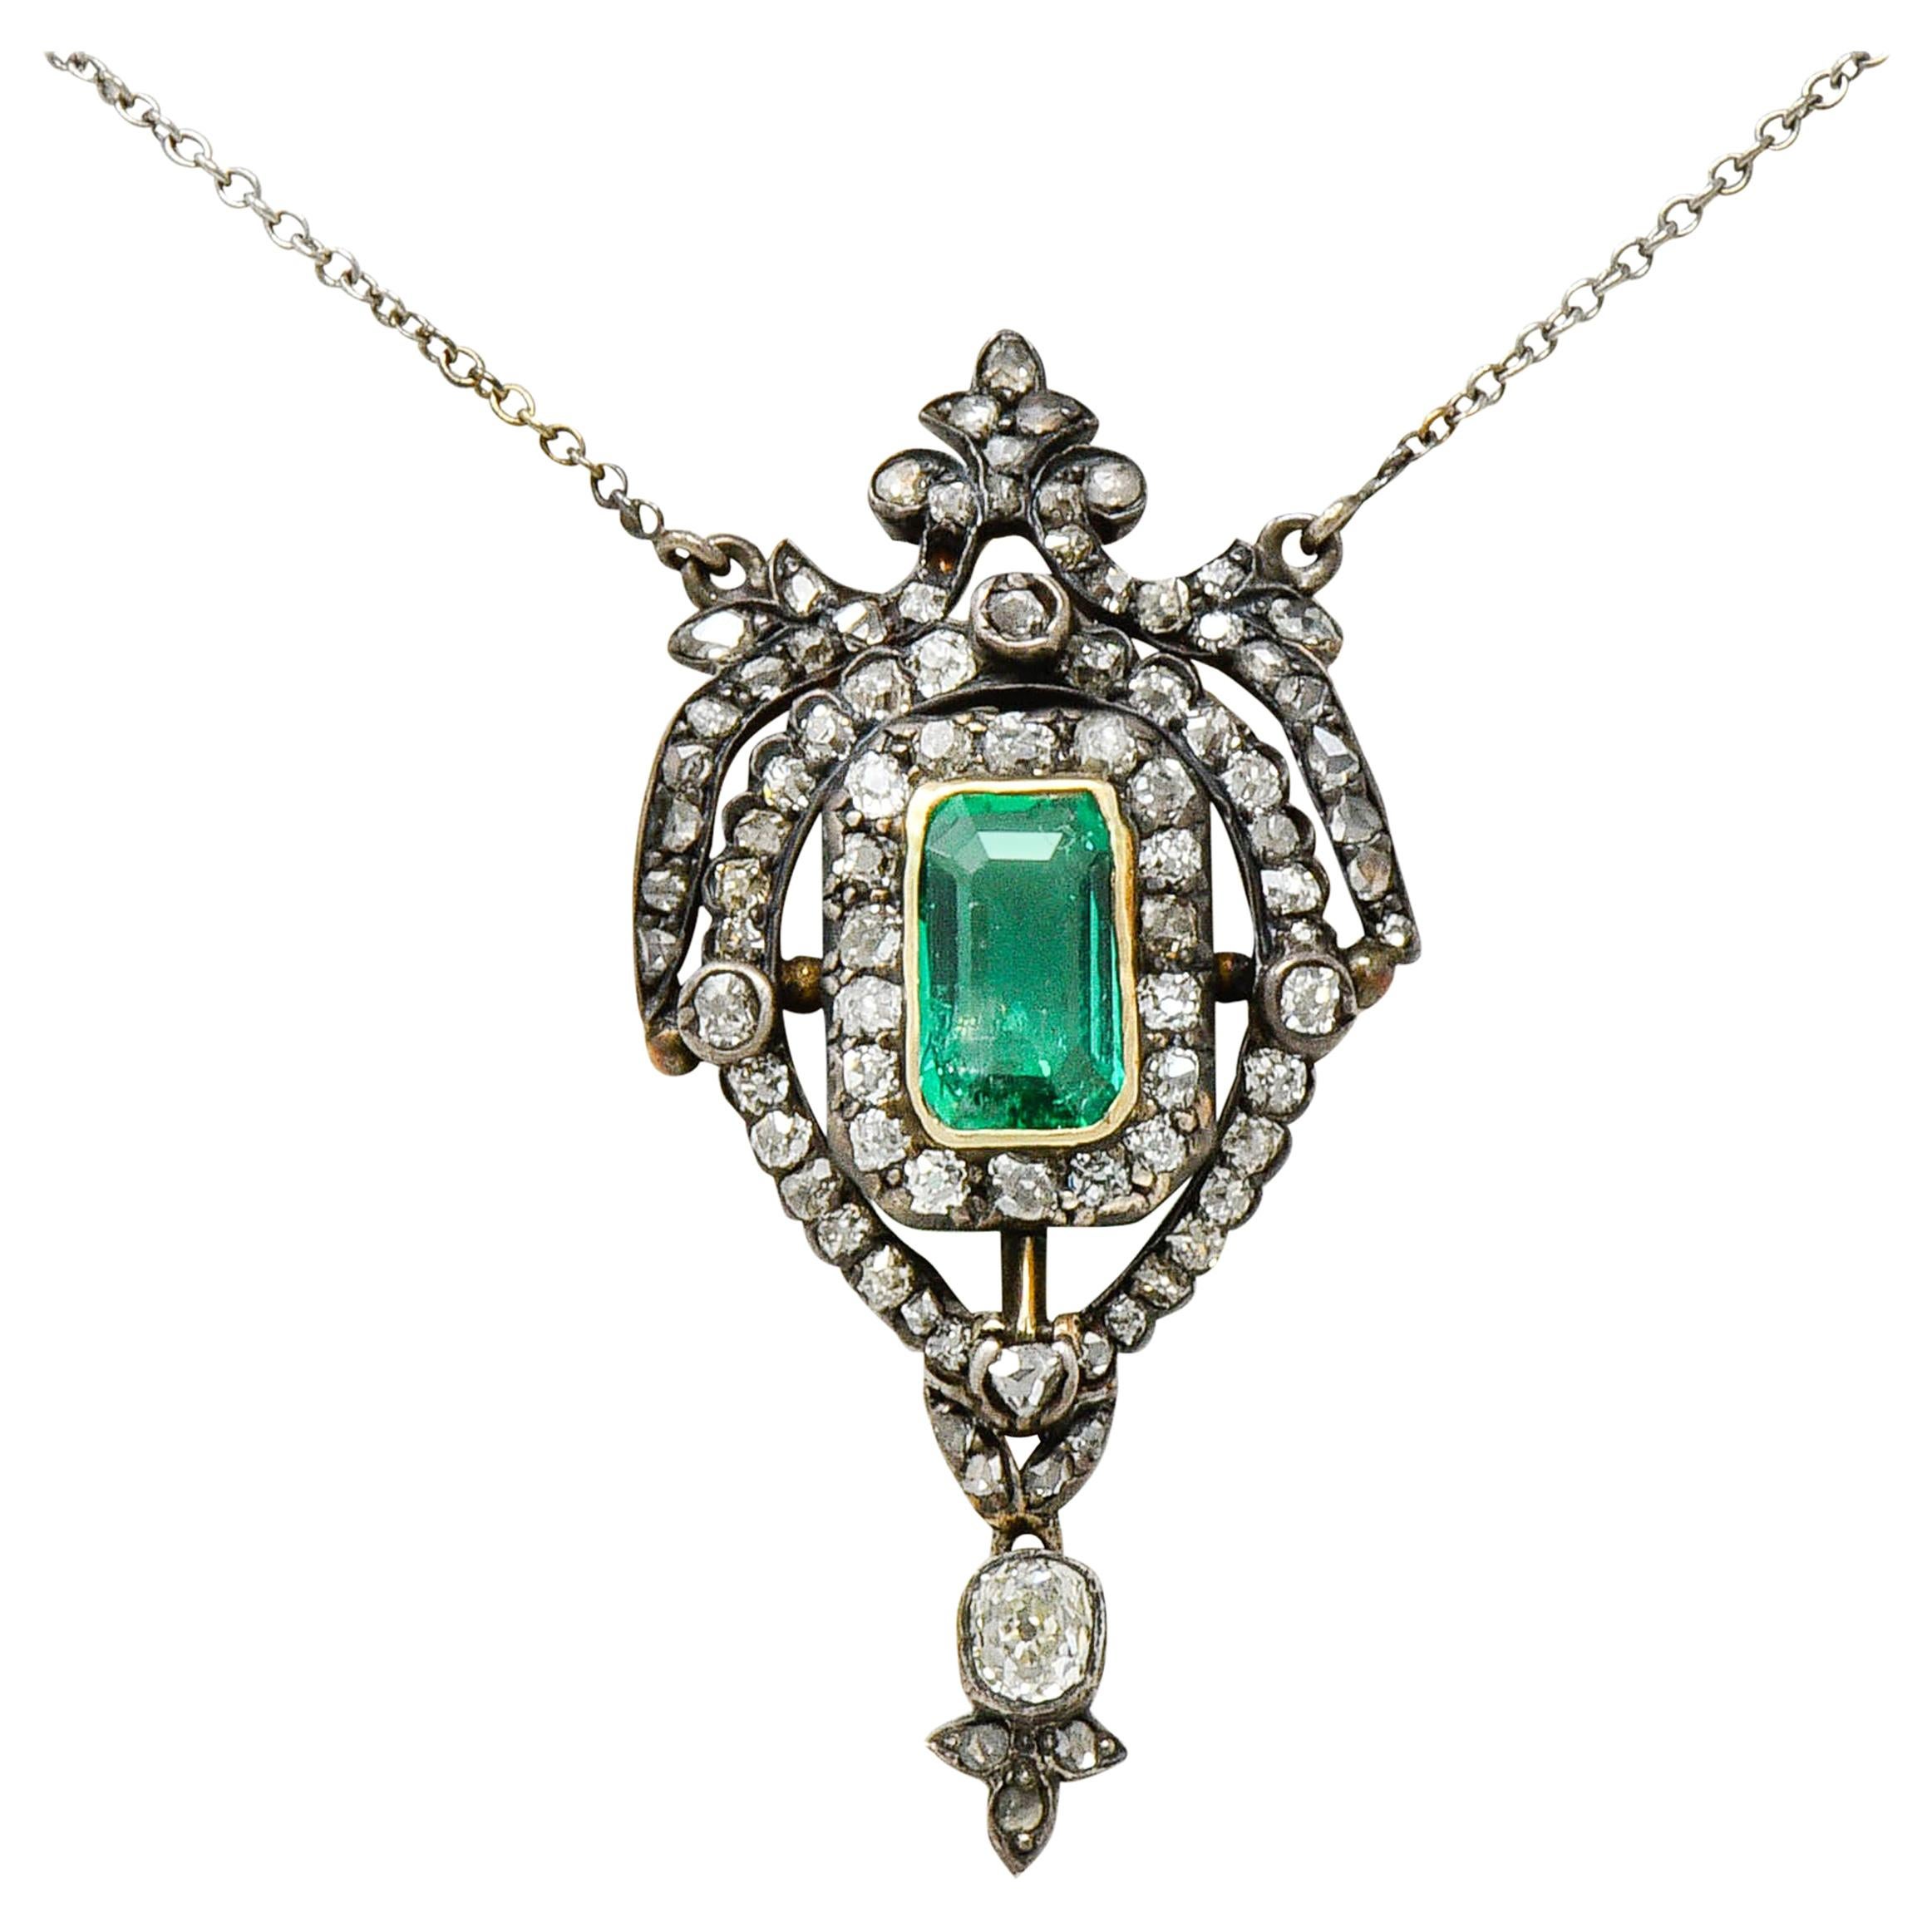 Early Victorian Emerald Diamond Silver-Topped Gold Ornate Drop Necklace